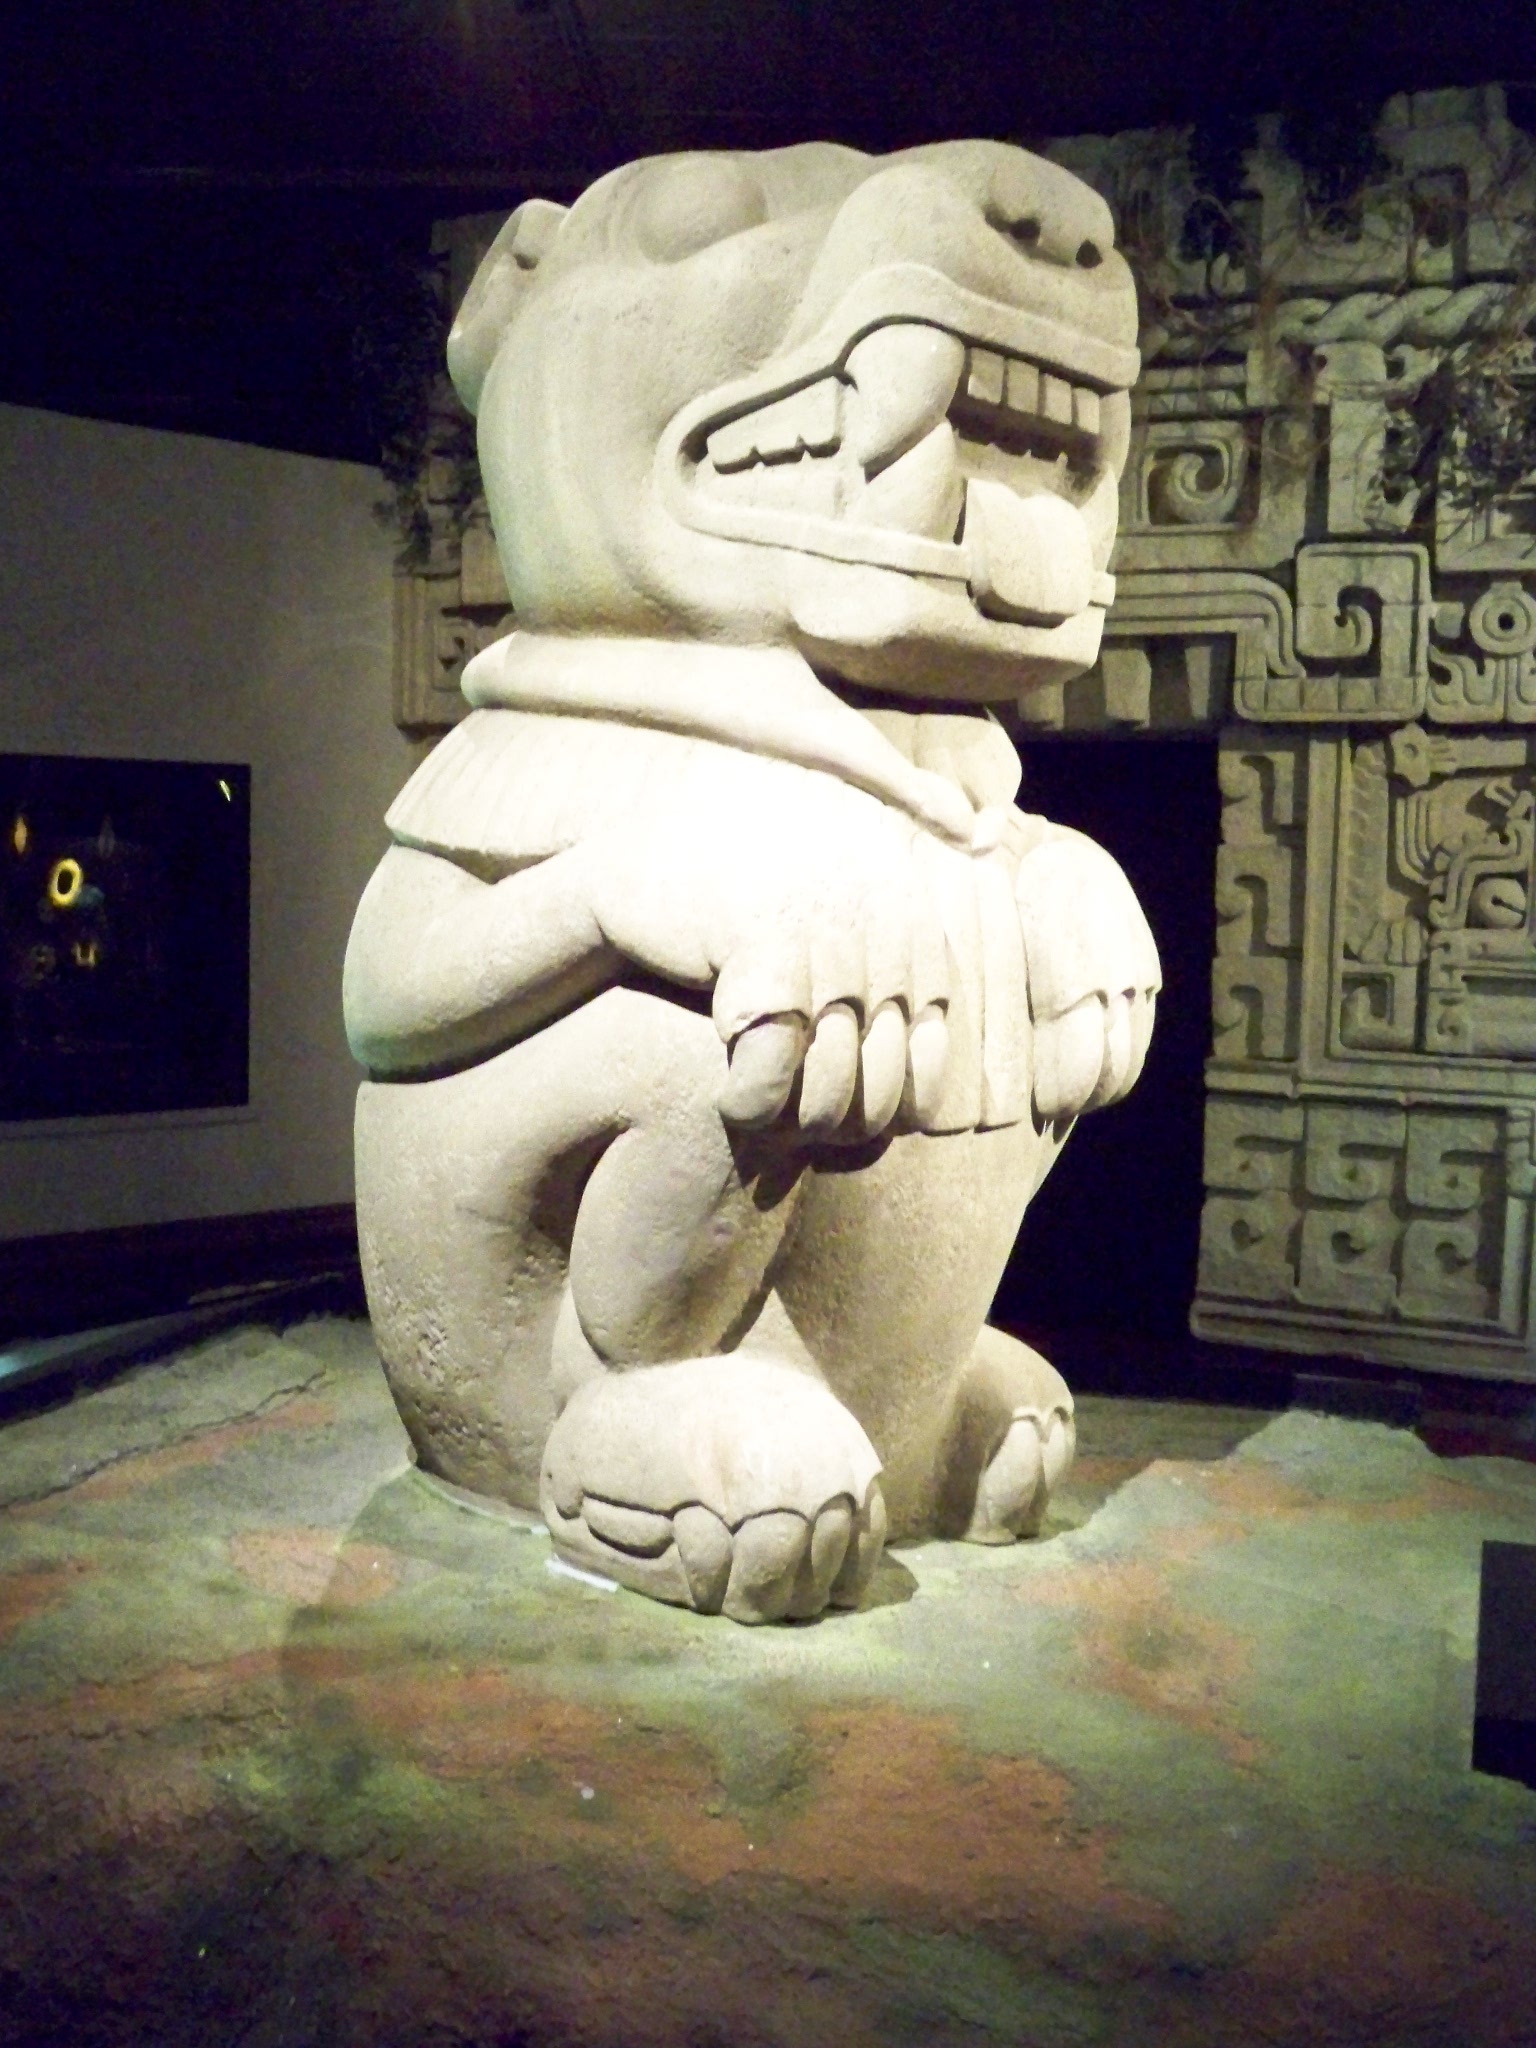 there is a large stone sculpture on display in the room